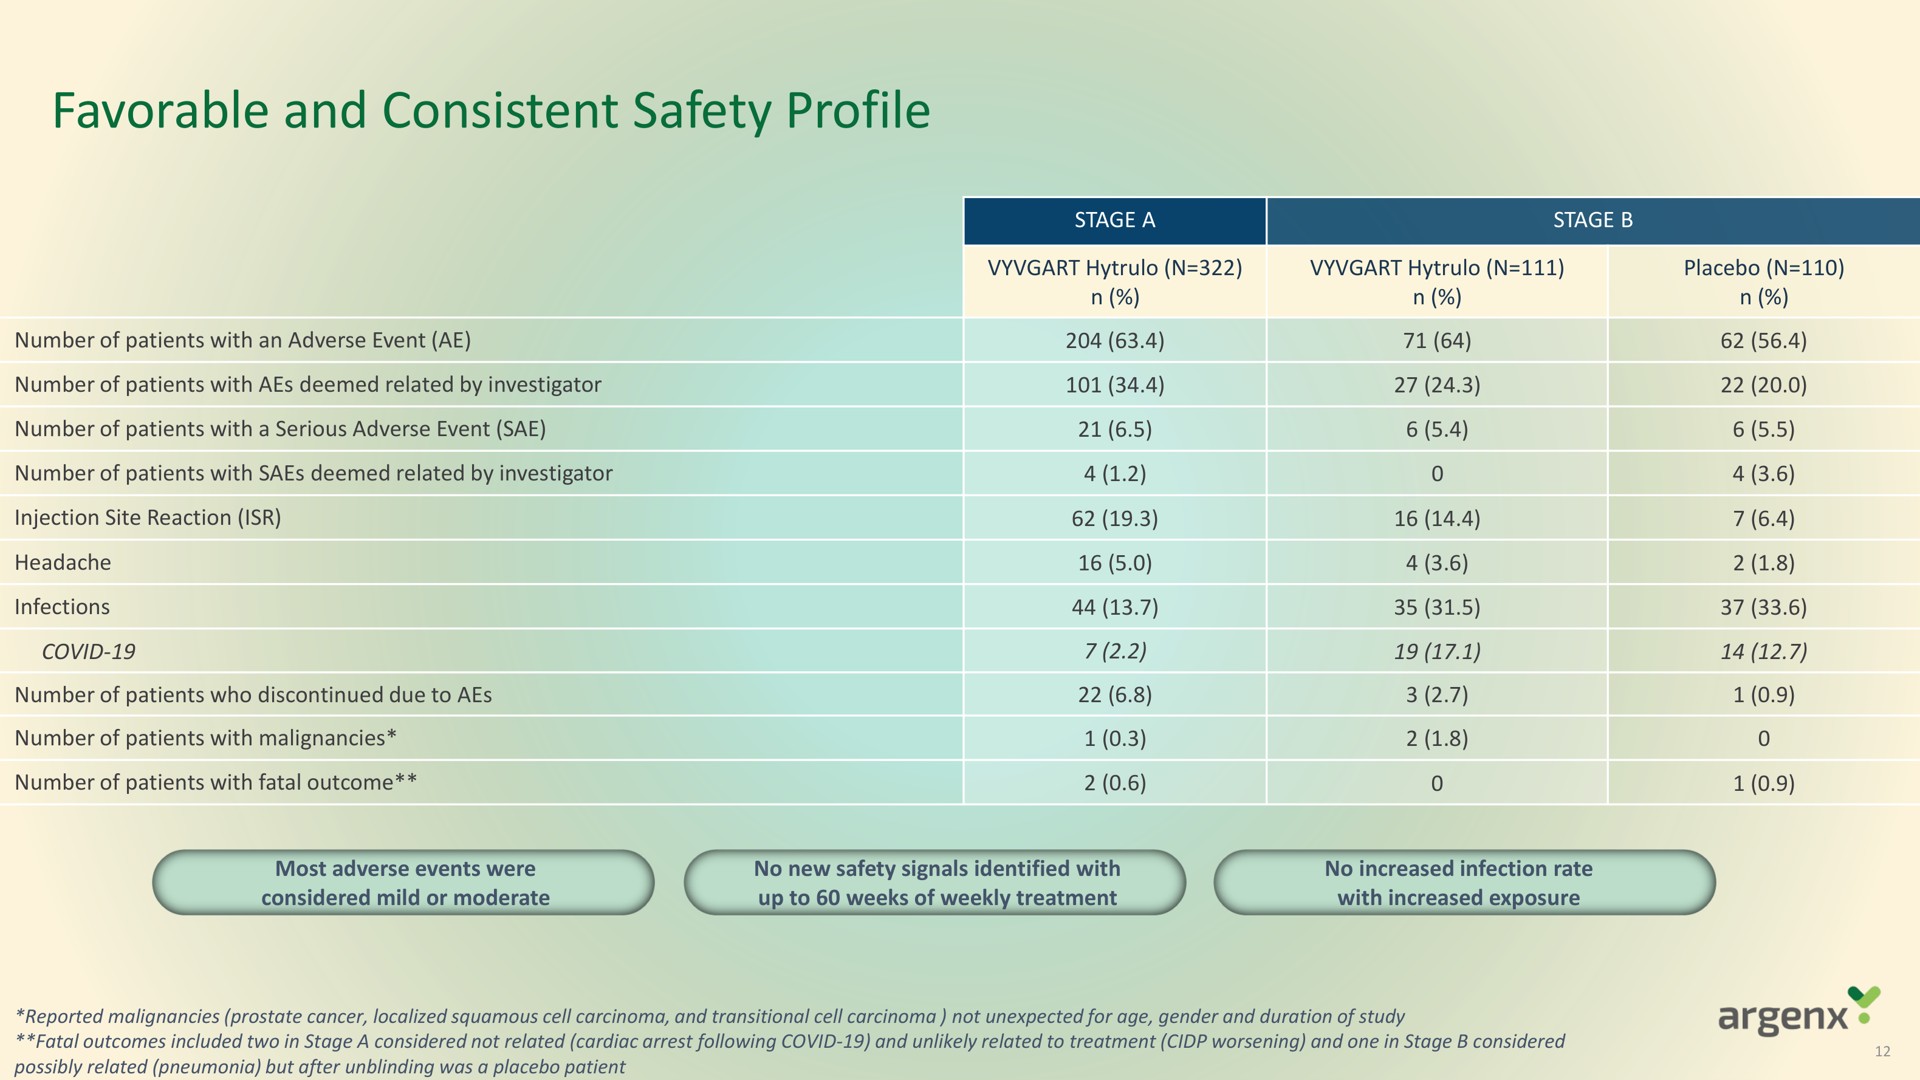 favorable and consistent safety profile | argenx SE